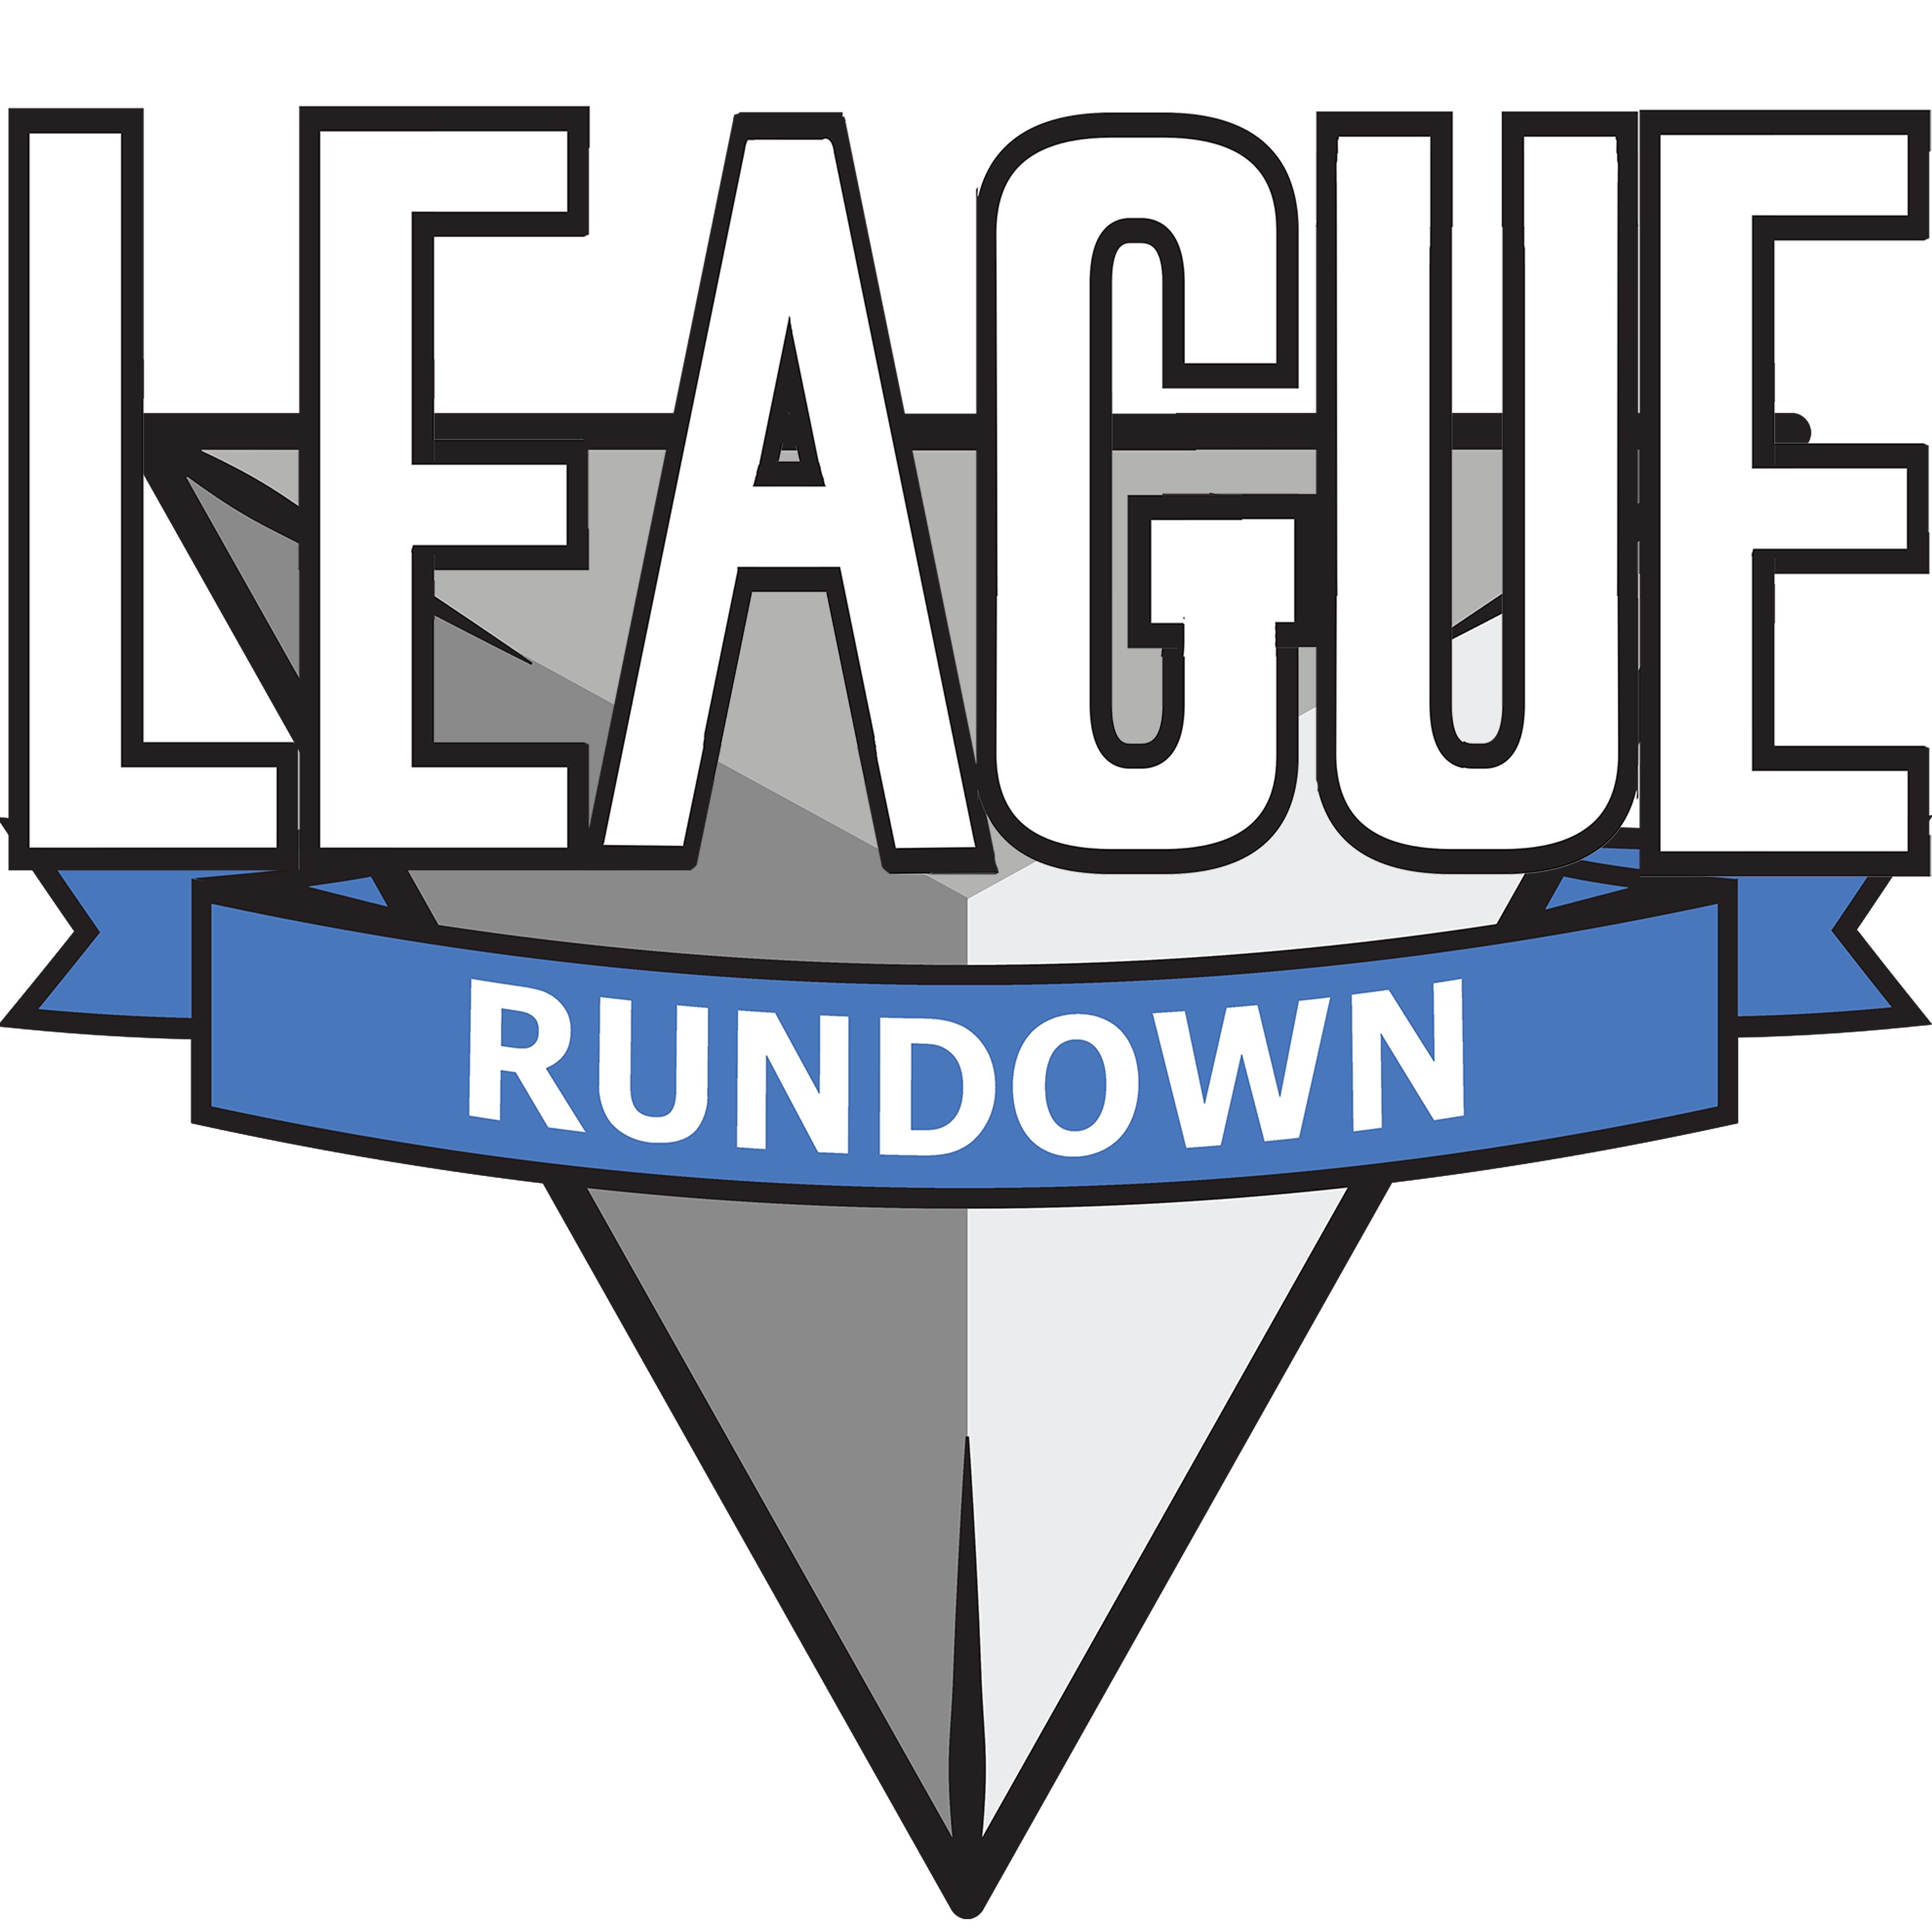 League Rundown - Episode 501: Managed Democracy Killers Almost Defeat Tyranny